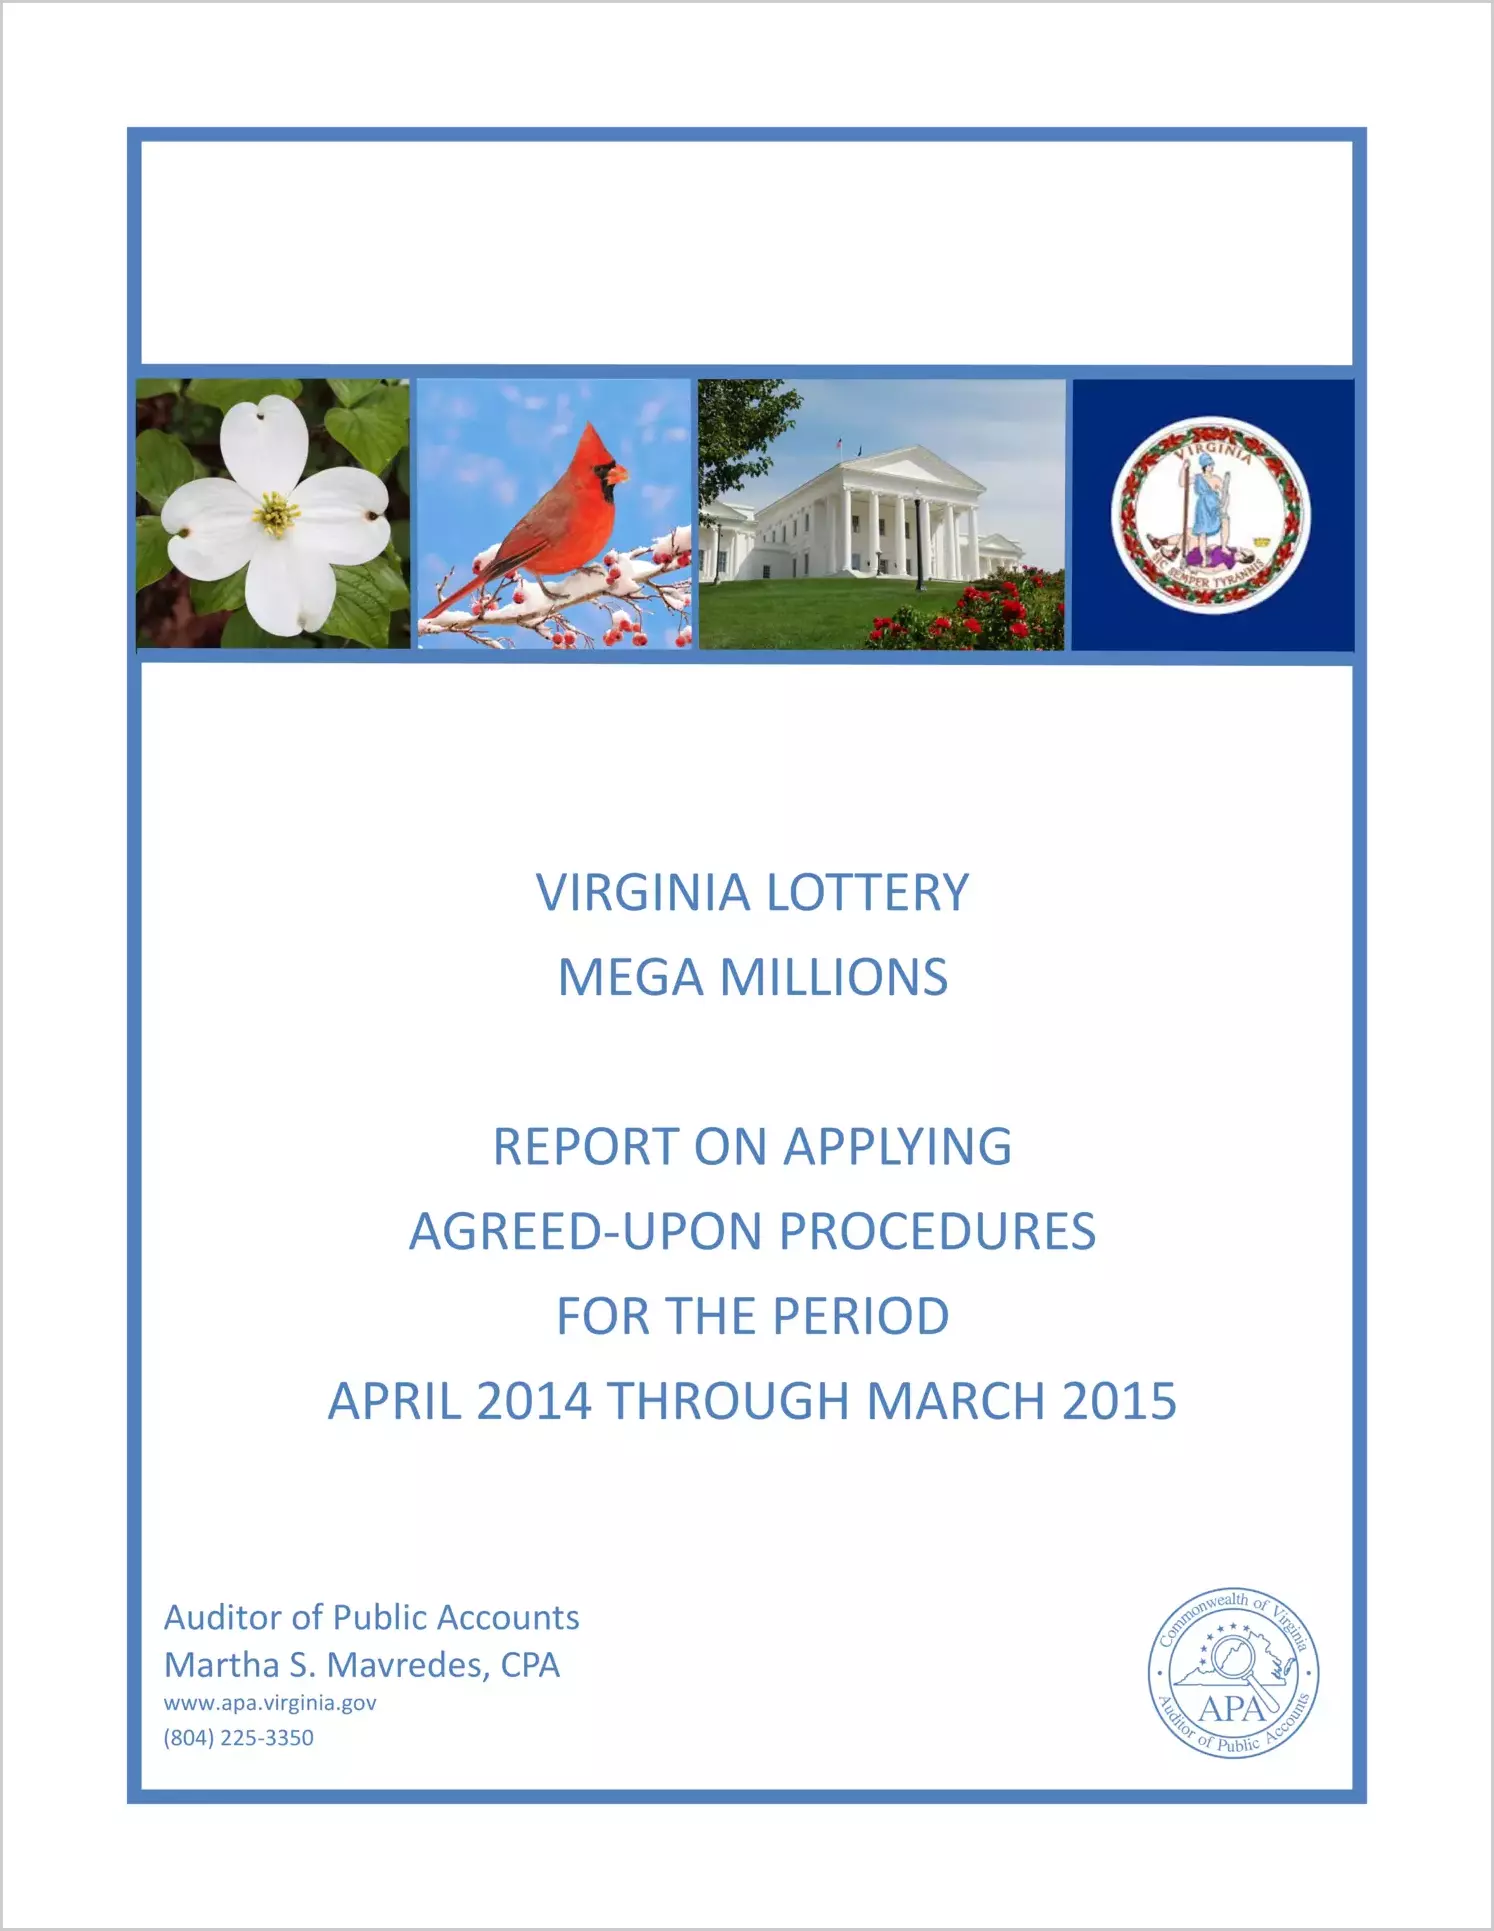 State Lottery Department Mega Millions report on Applying Agreed-Upon Procedures for the period April, 2014 through March, 2015